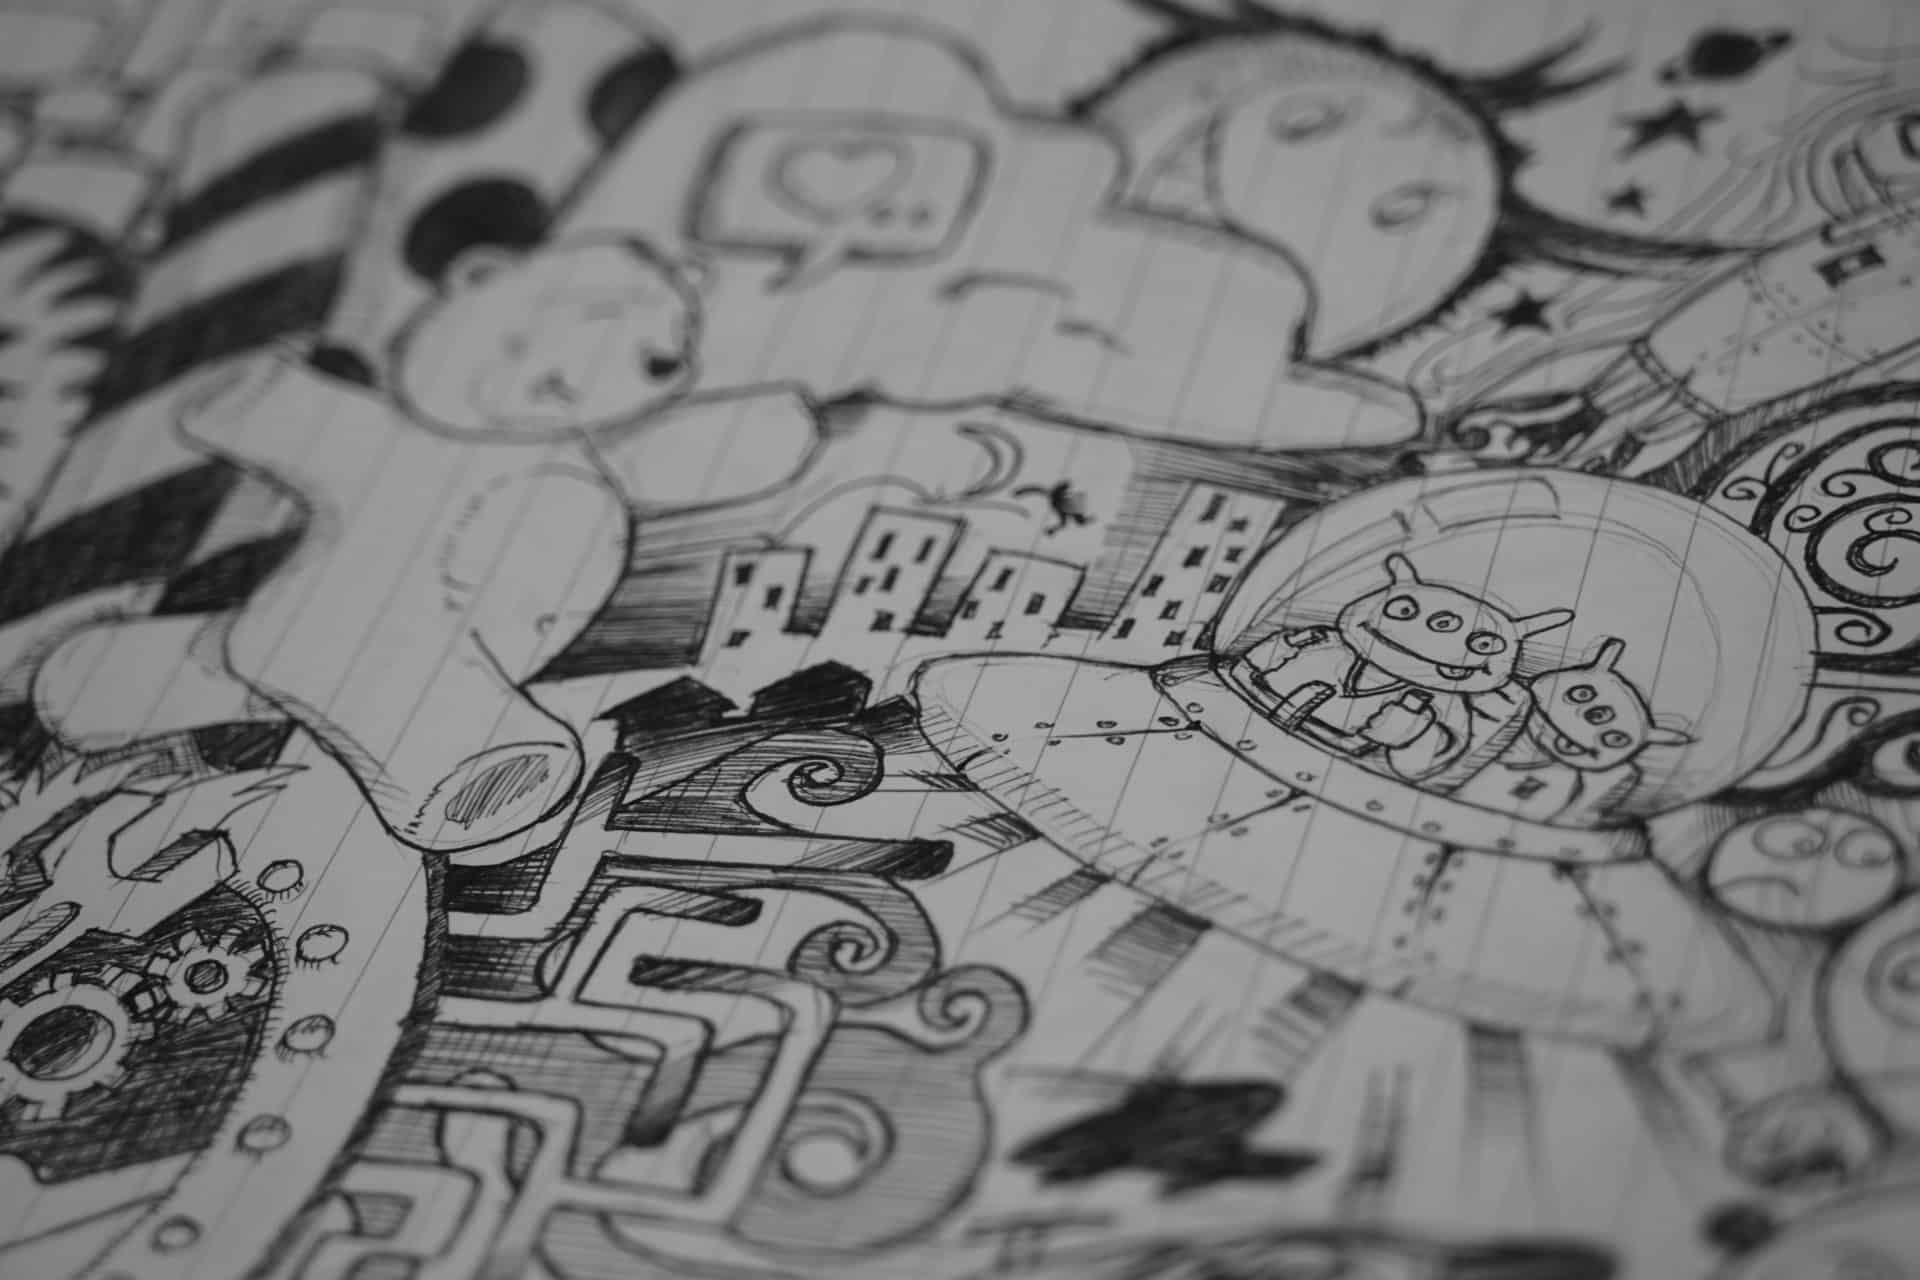 Black and white image of lots of cartoon drawings overlapping each other